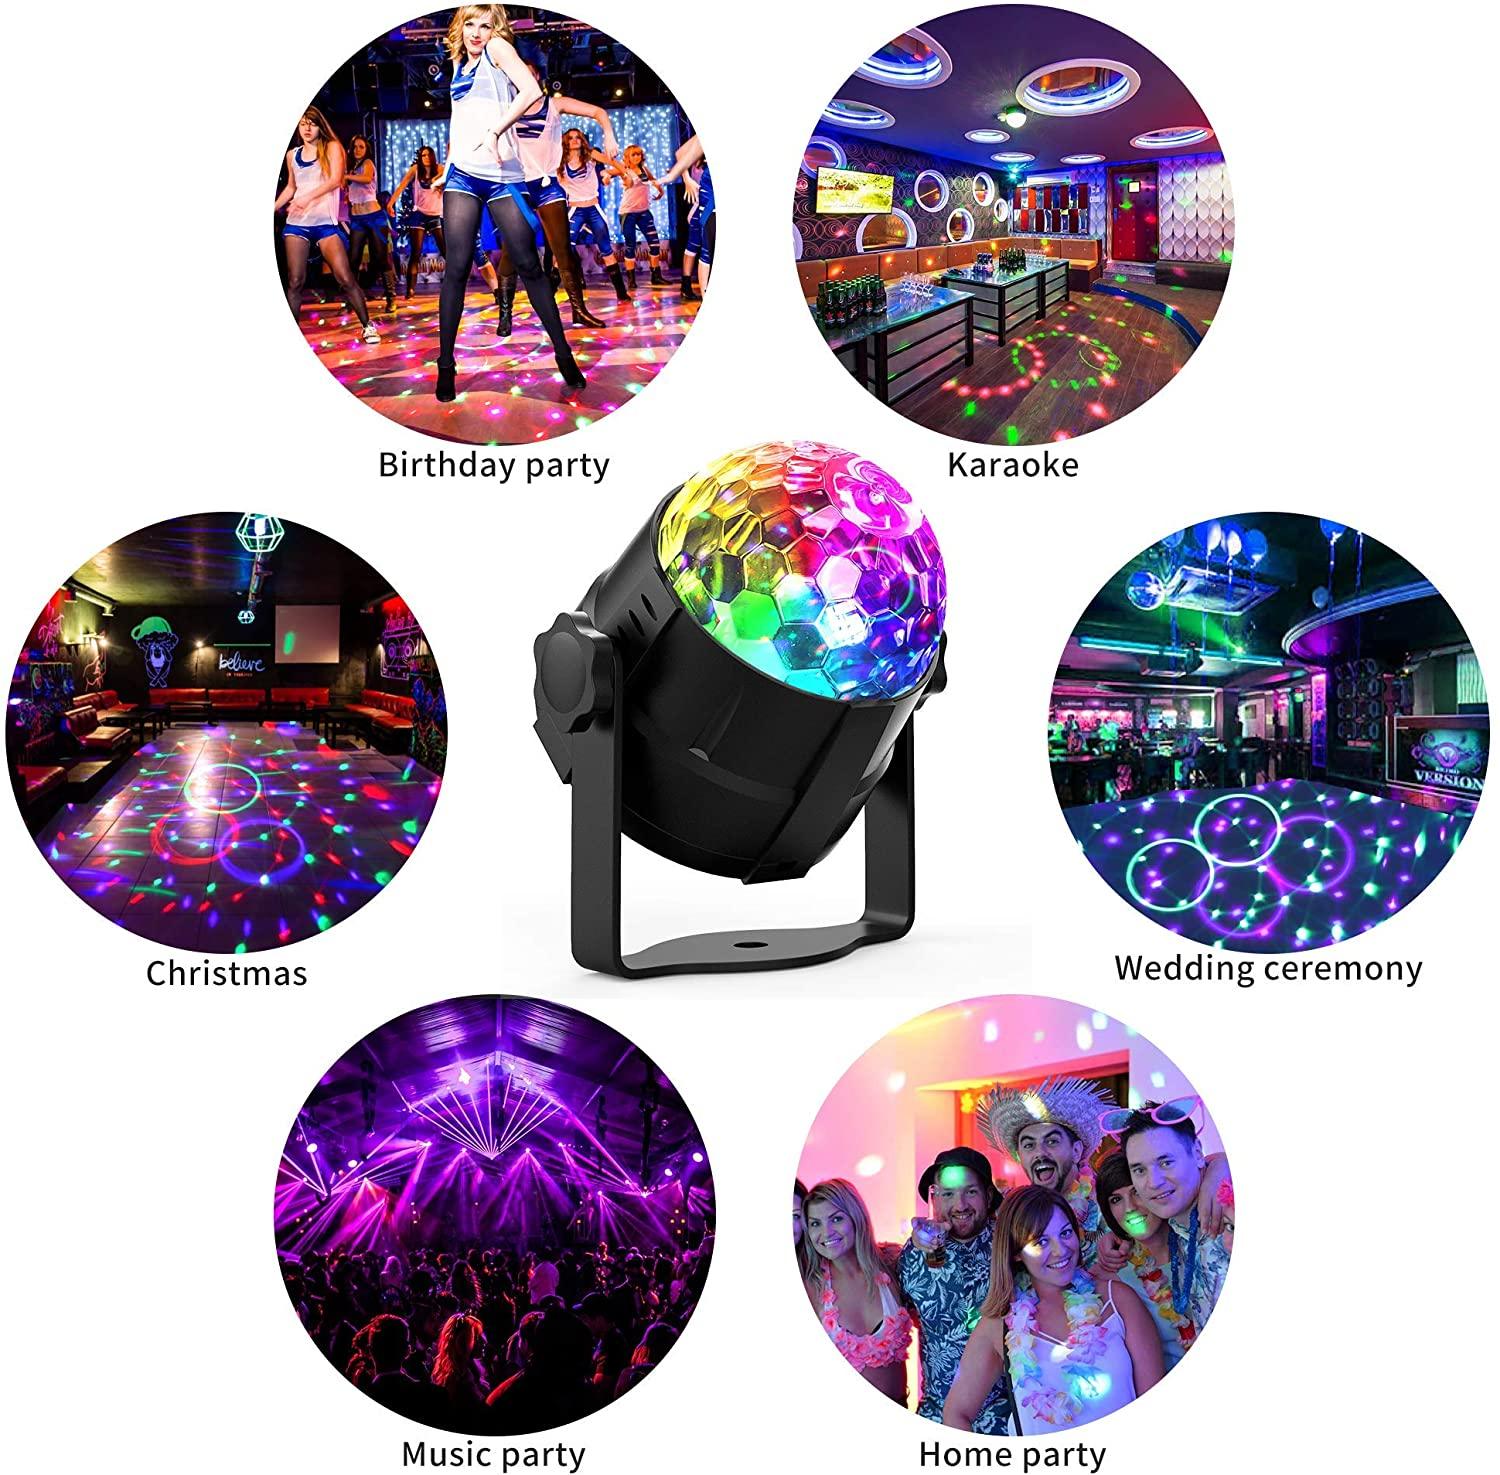 15 Colors Disco Light Ball, Sound Activated Strobe Light With Remote Control for Home Glow Birthday Wedding Parties - If you say i do